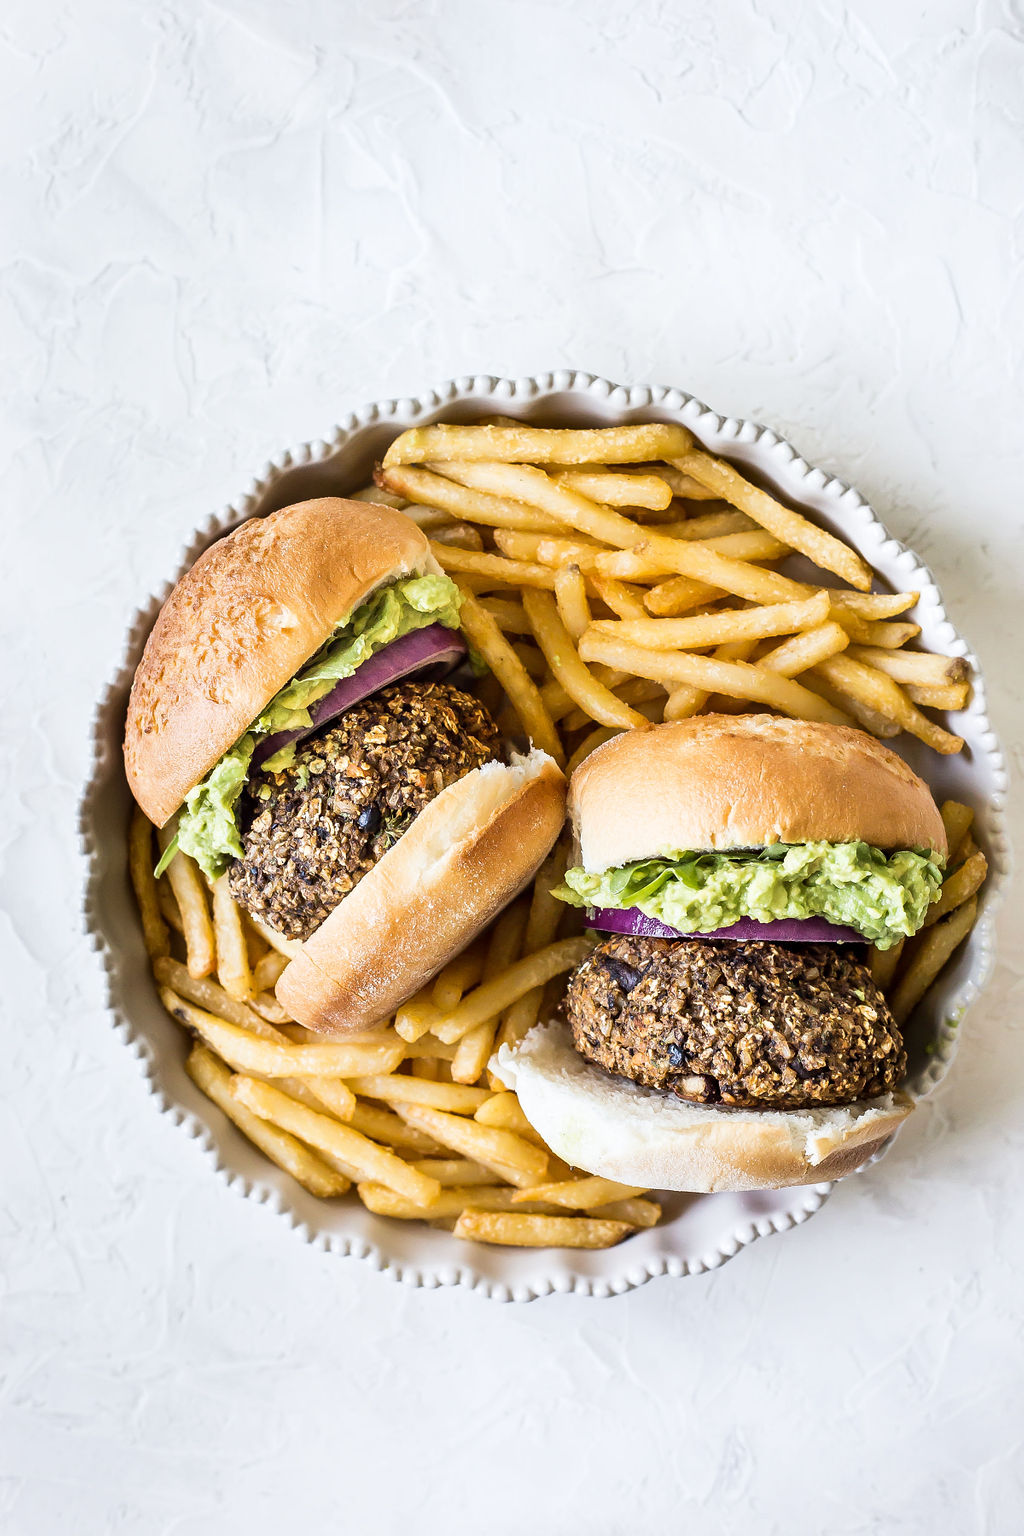 Sweet potato mushroom guac burgers in a bowl with french fries.